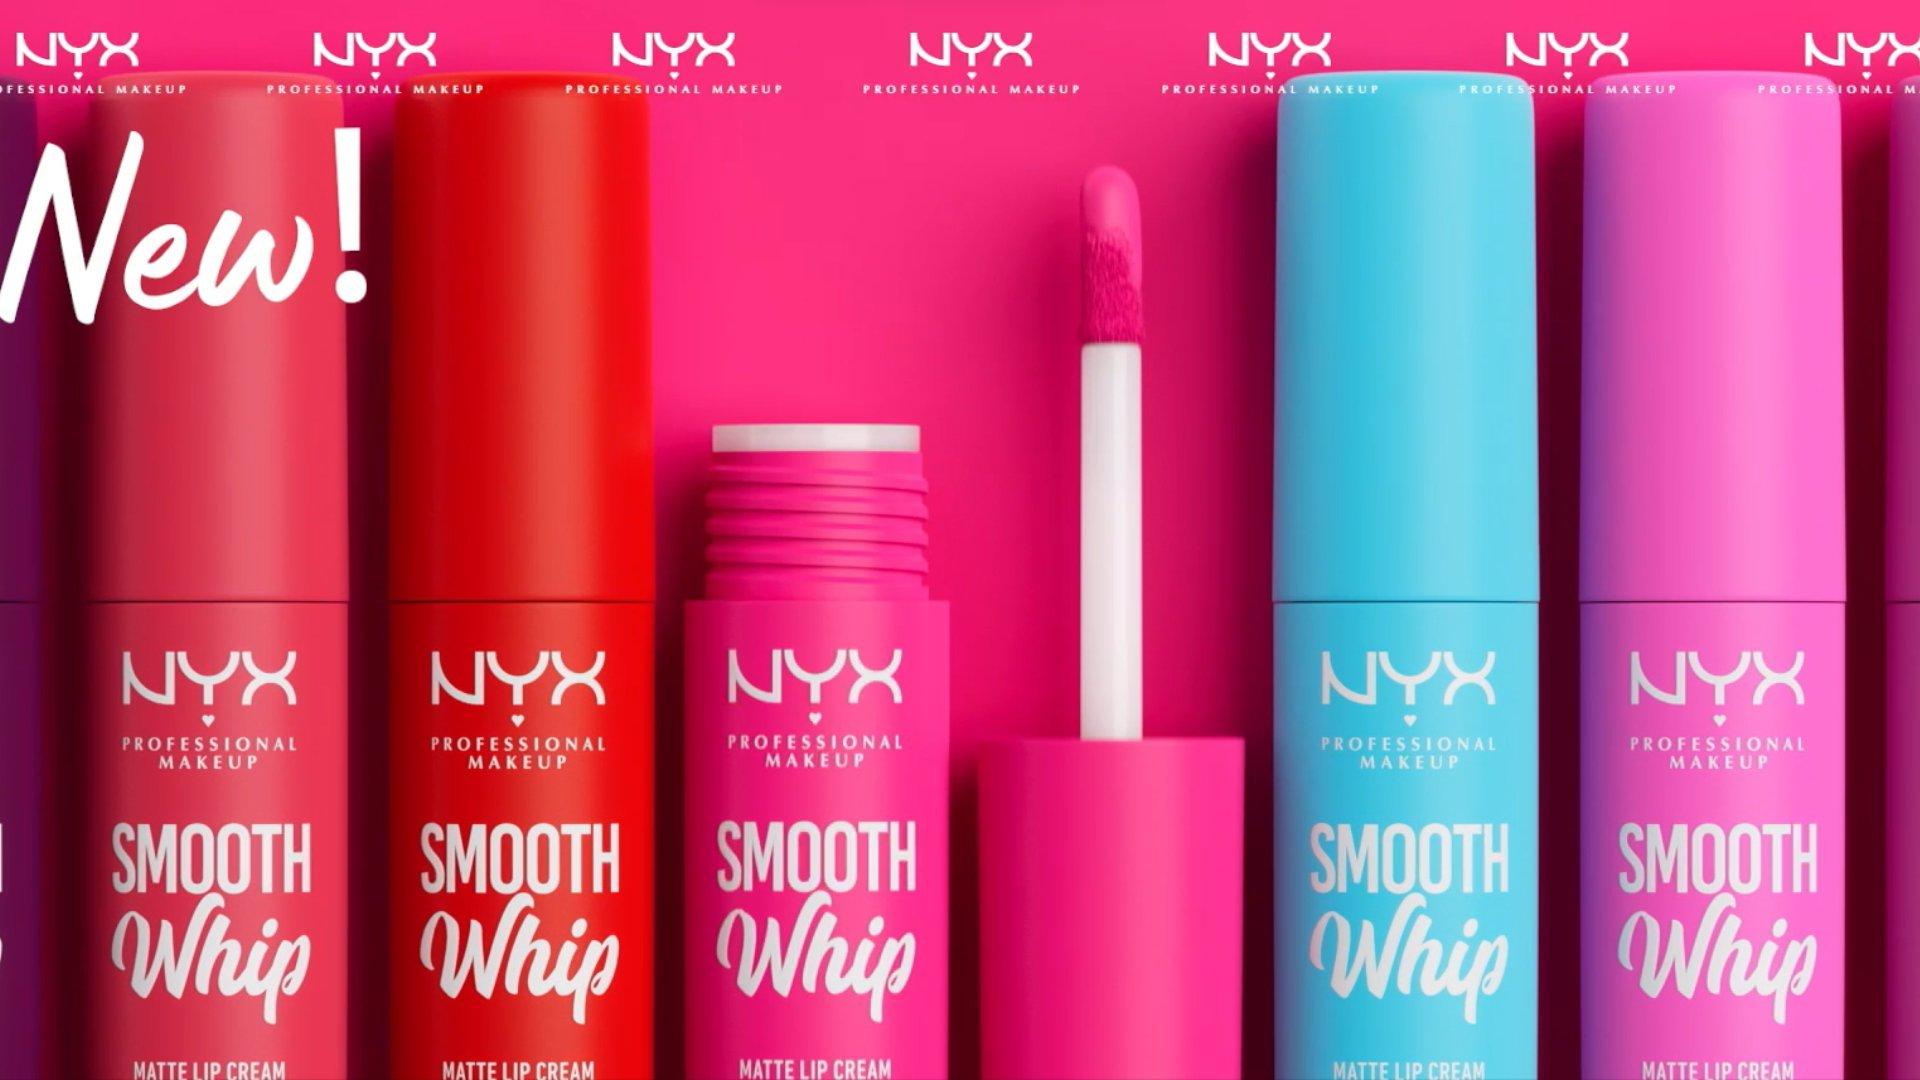  NYX PROFESSIONAL MAKEUP Smooth Whip Matte Lip Cream